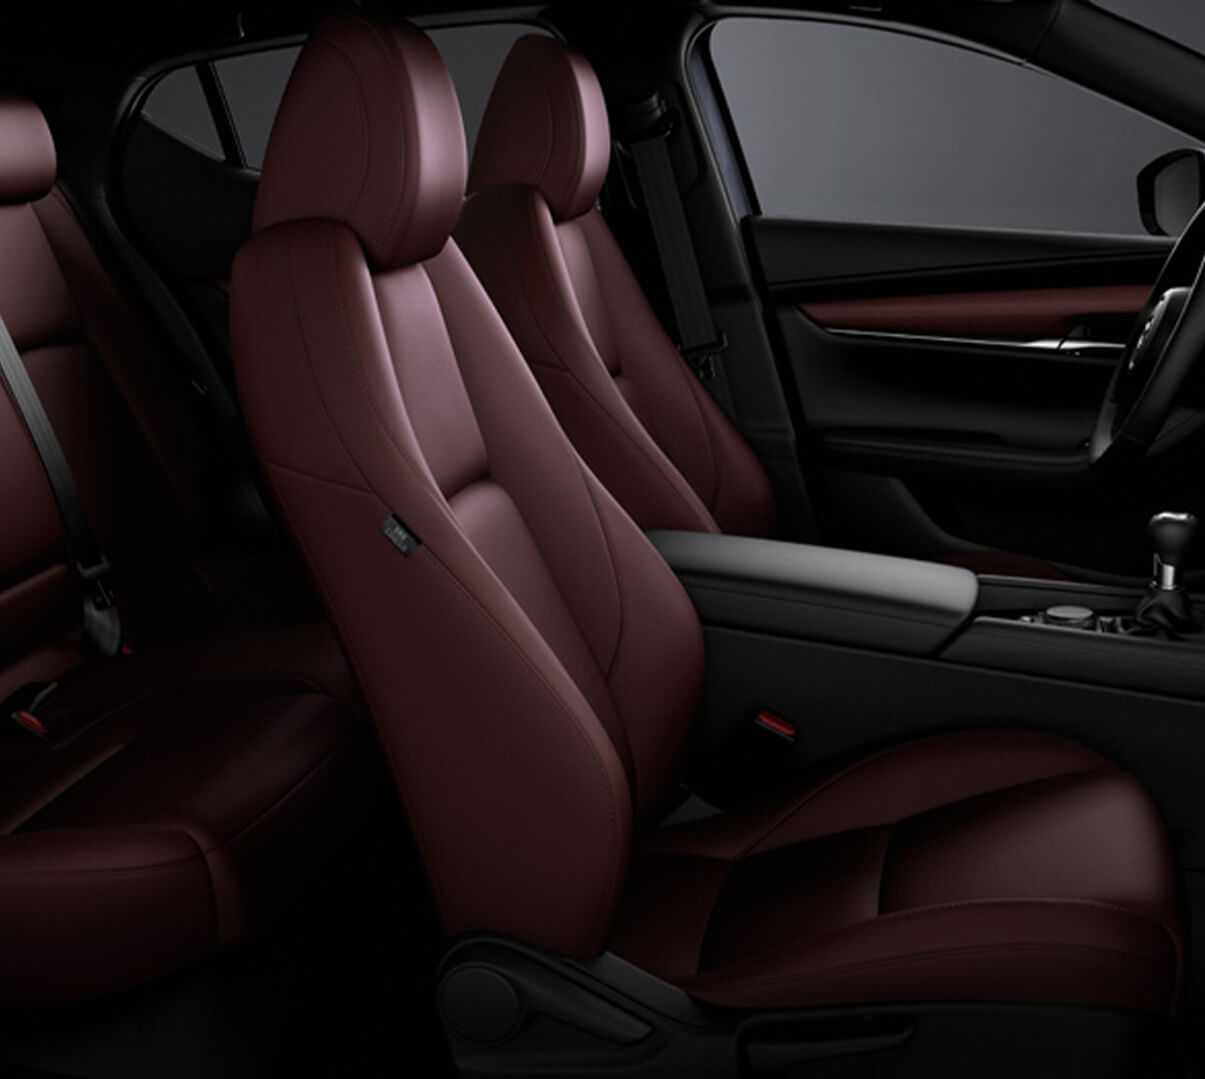 The four leather seats inside the Mazda3.